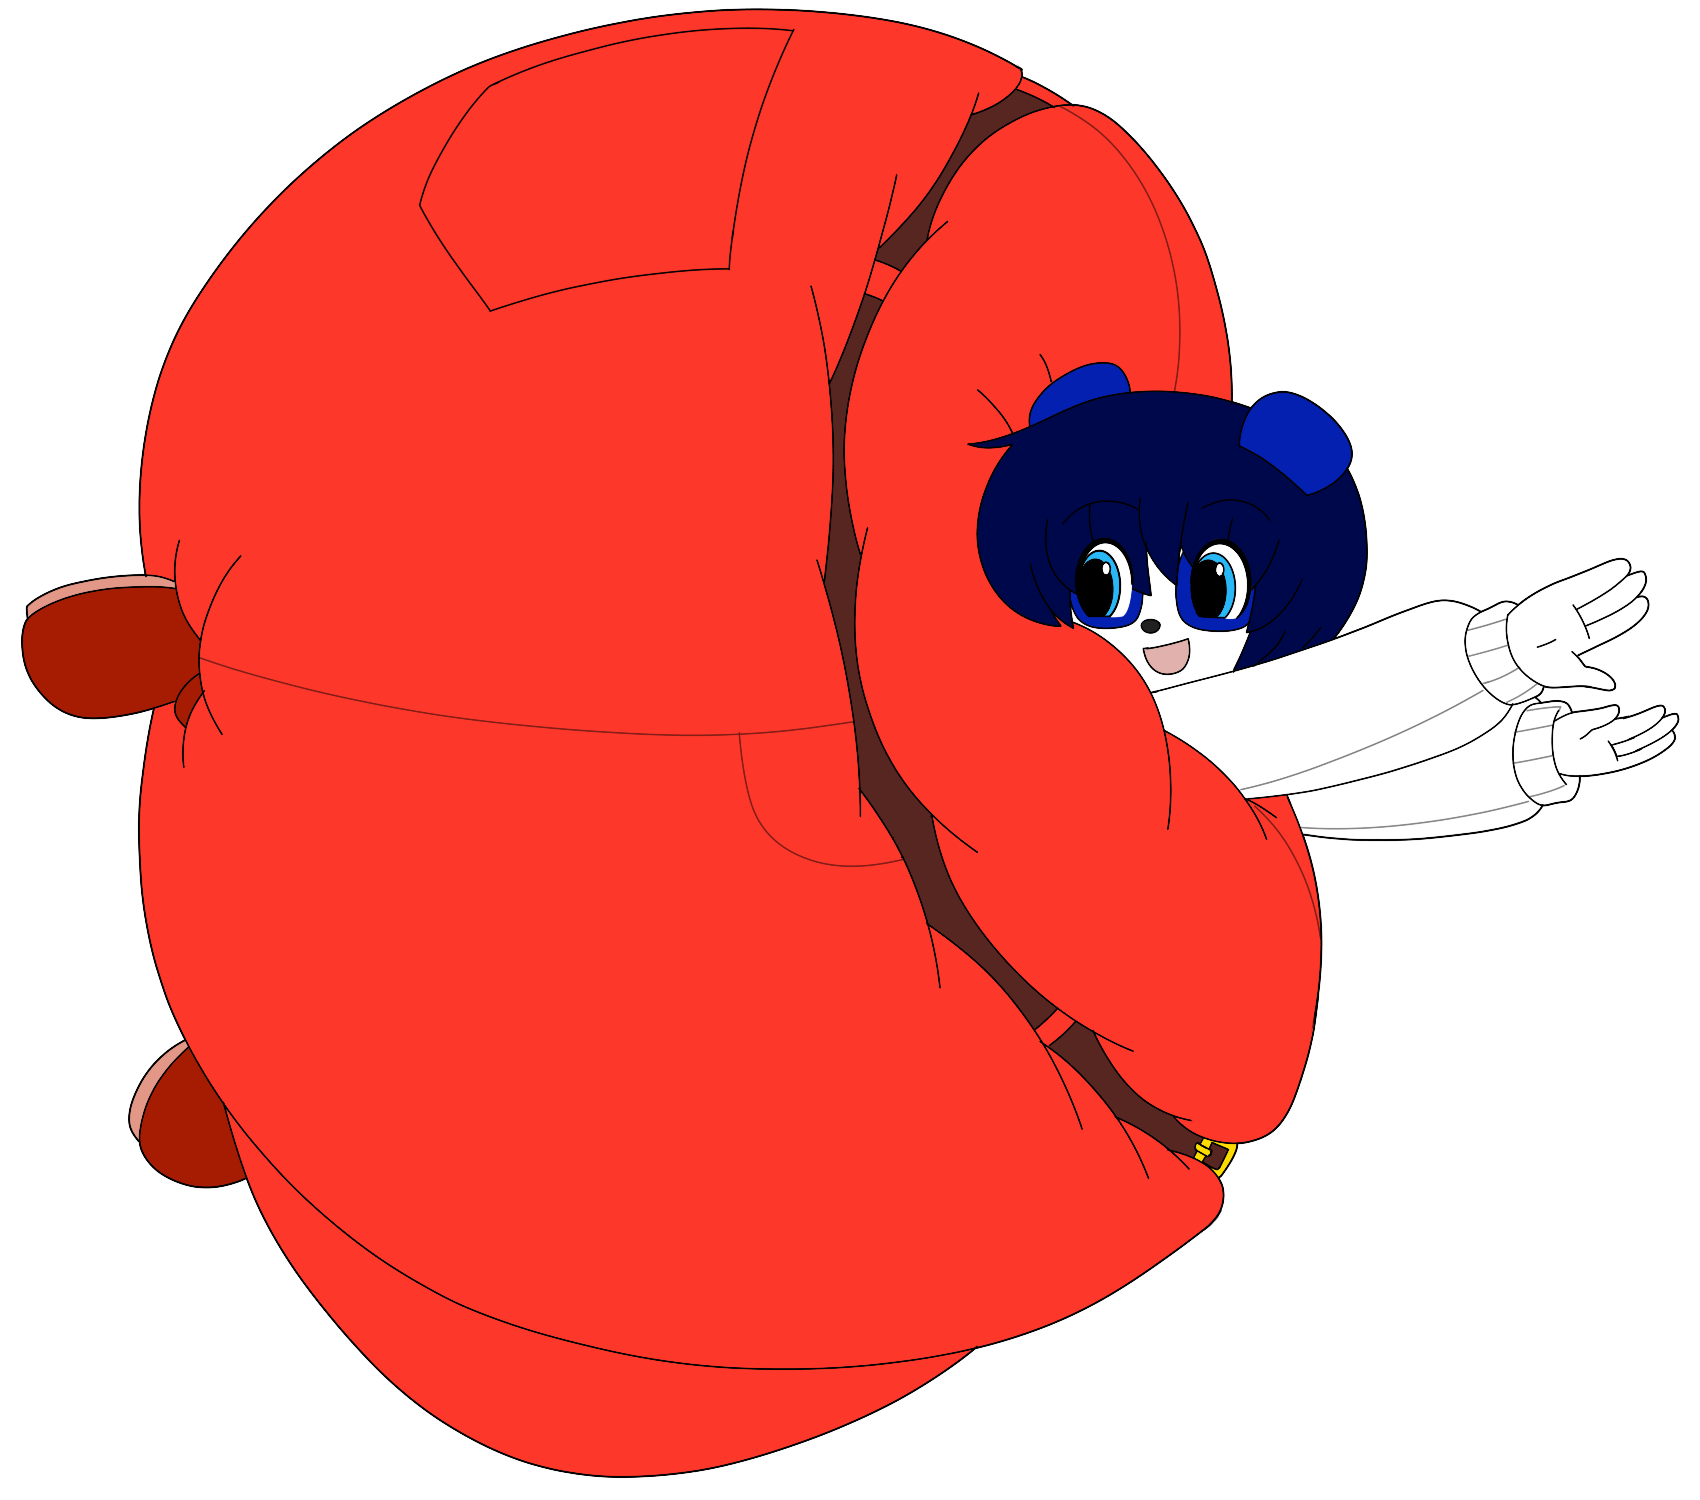 Peter's Inflatable Pants Flying by Tobihoshi on DeviantArt